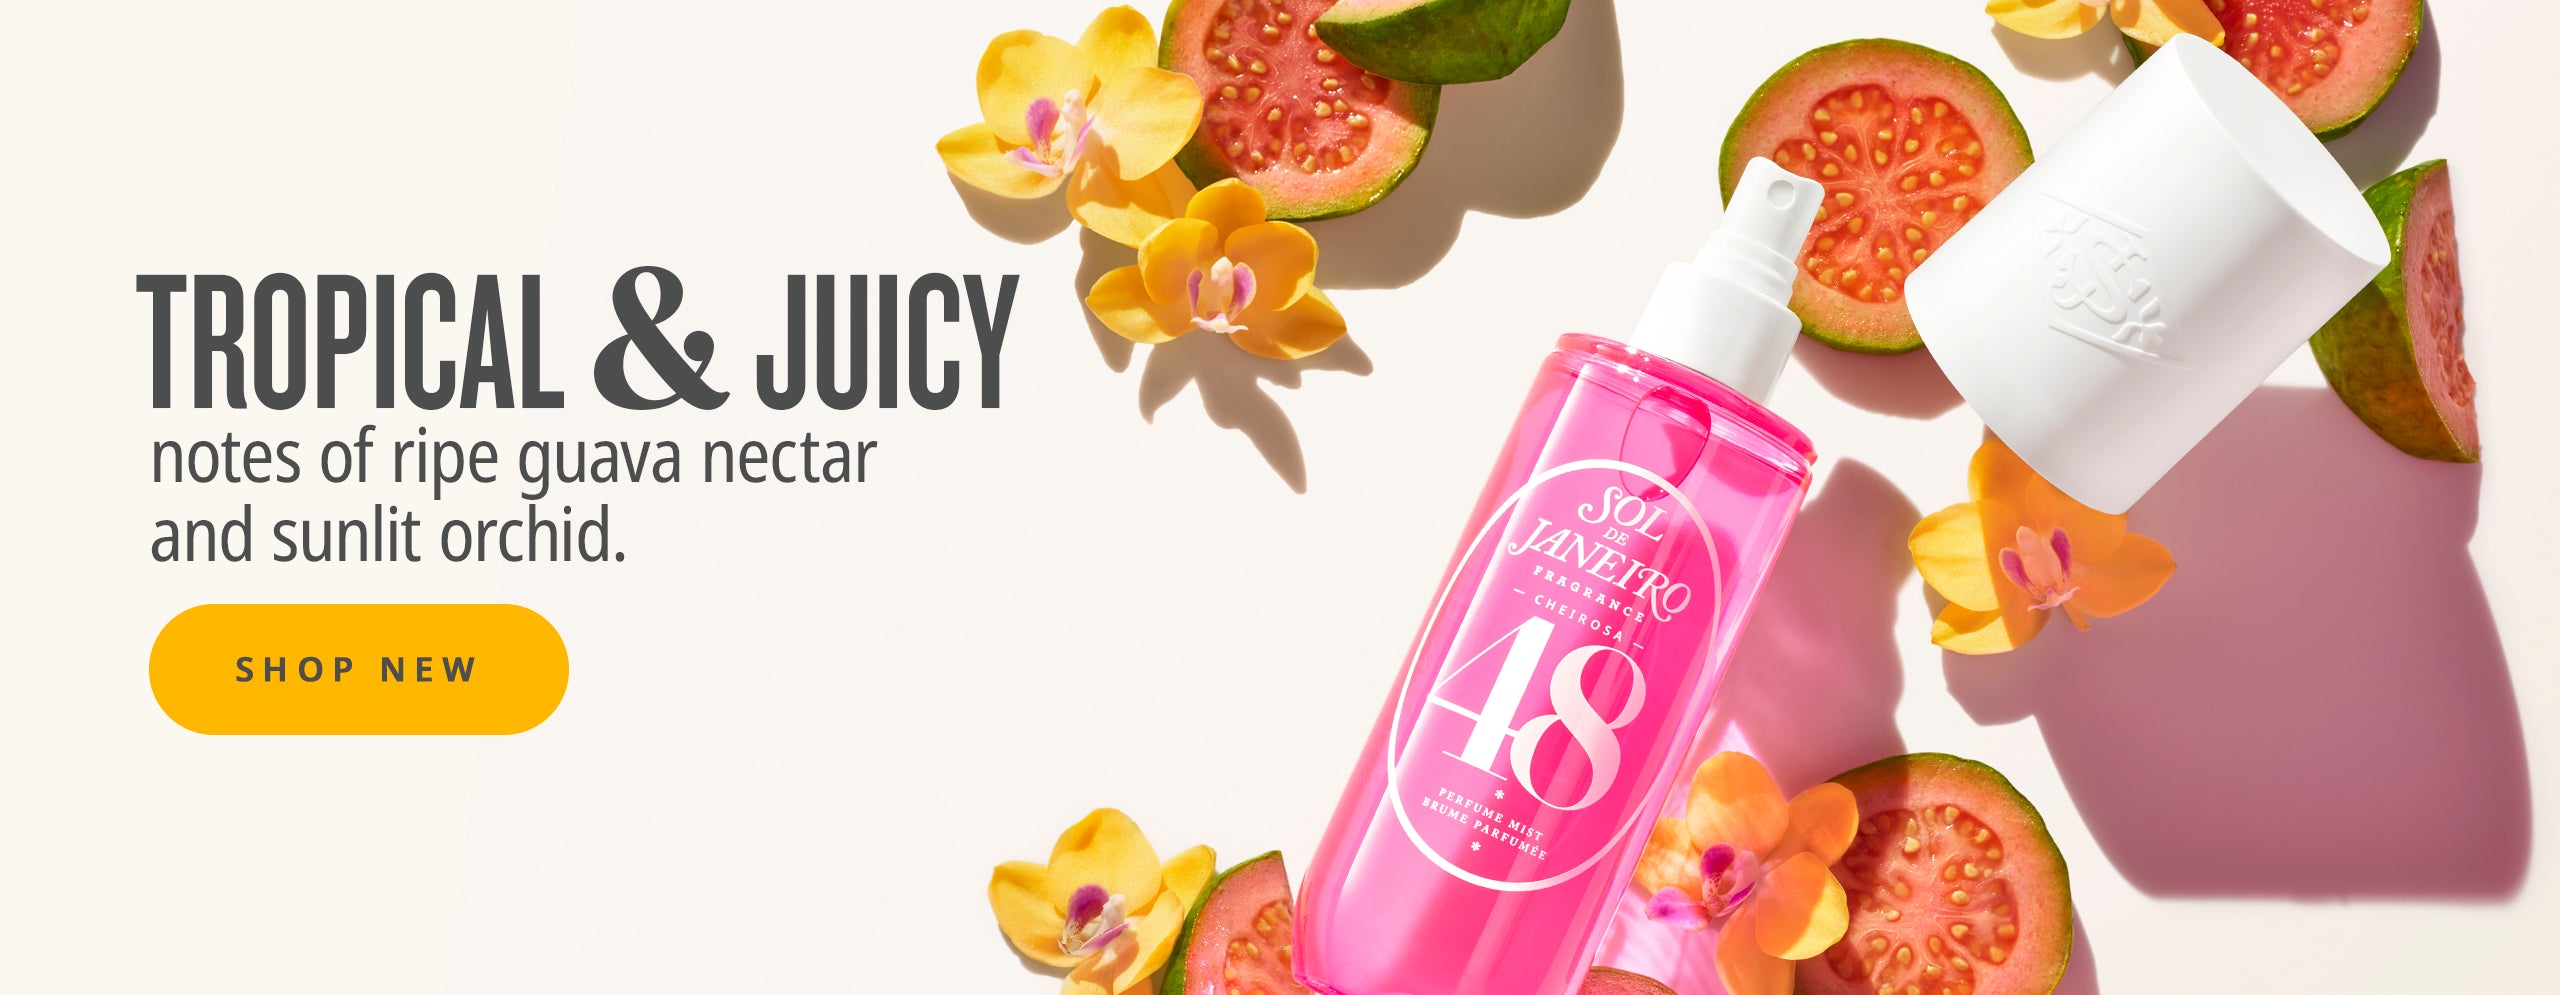 Tropical & juicy - notes of ripe guava nectar and sunlit orchid.